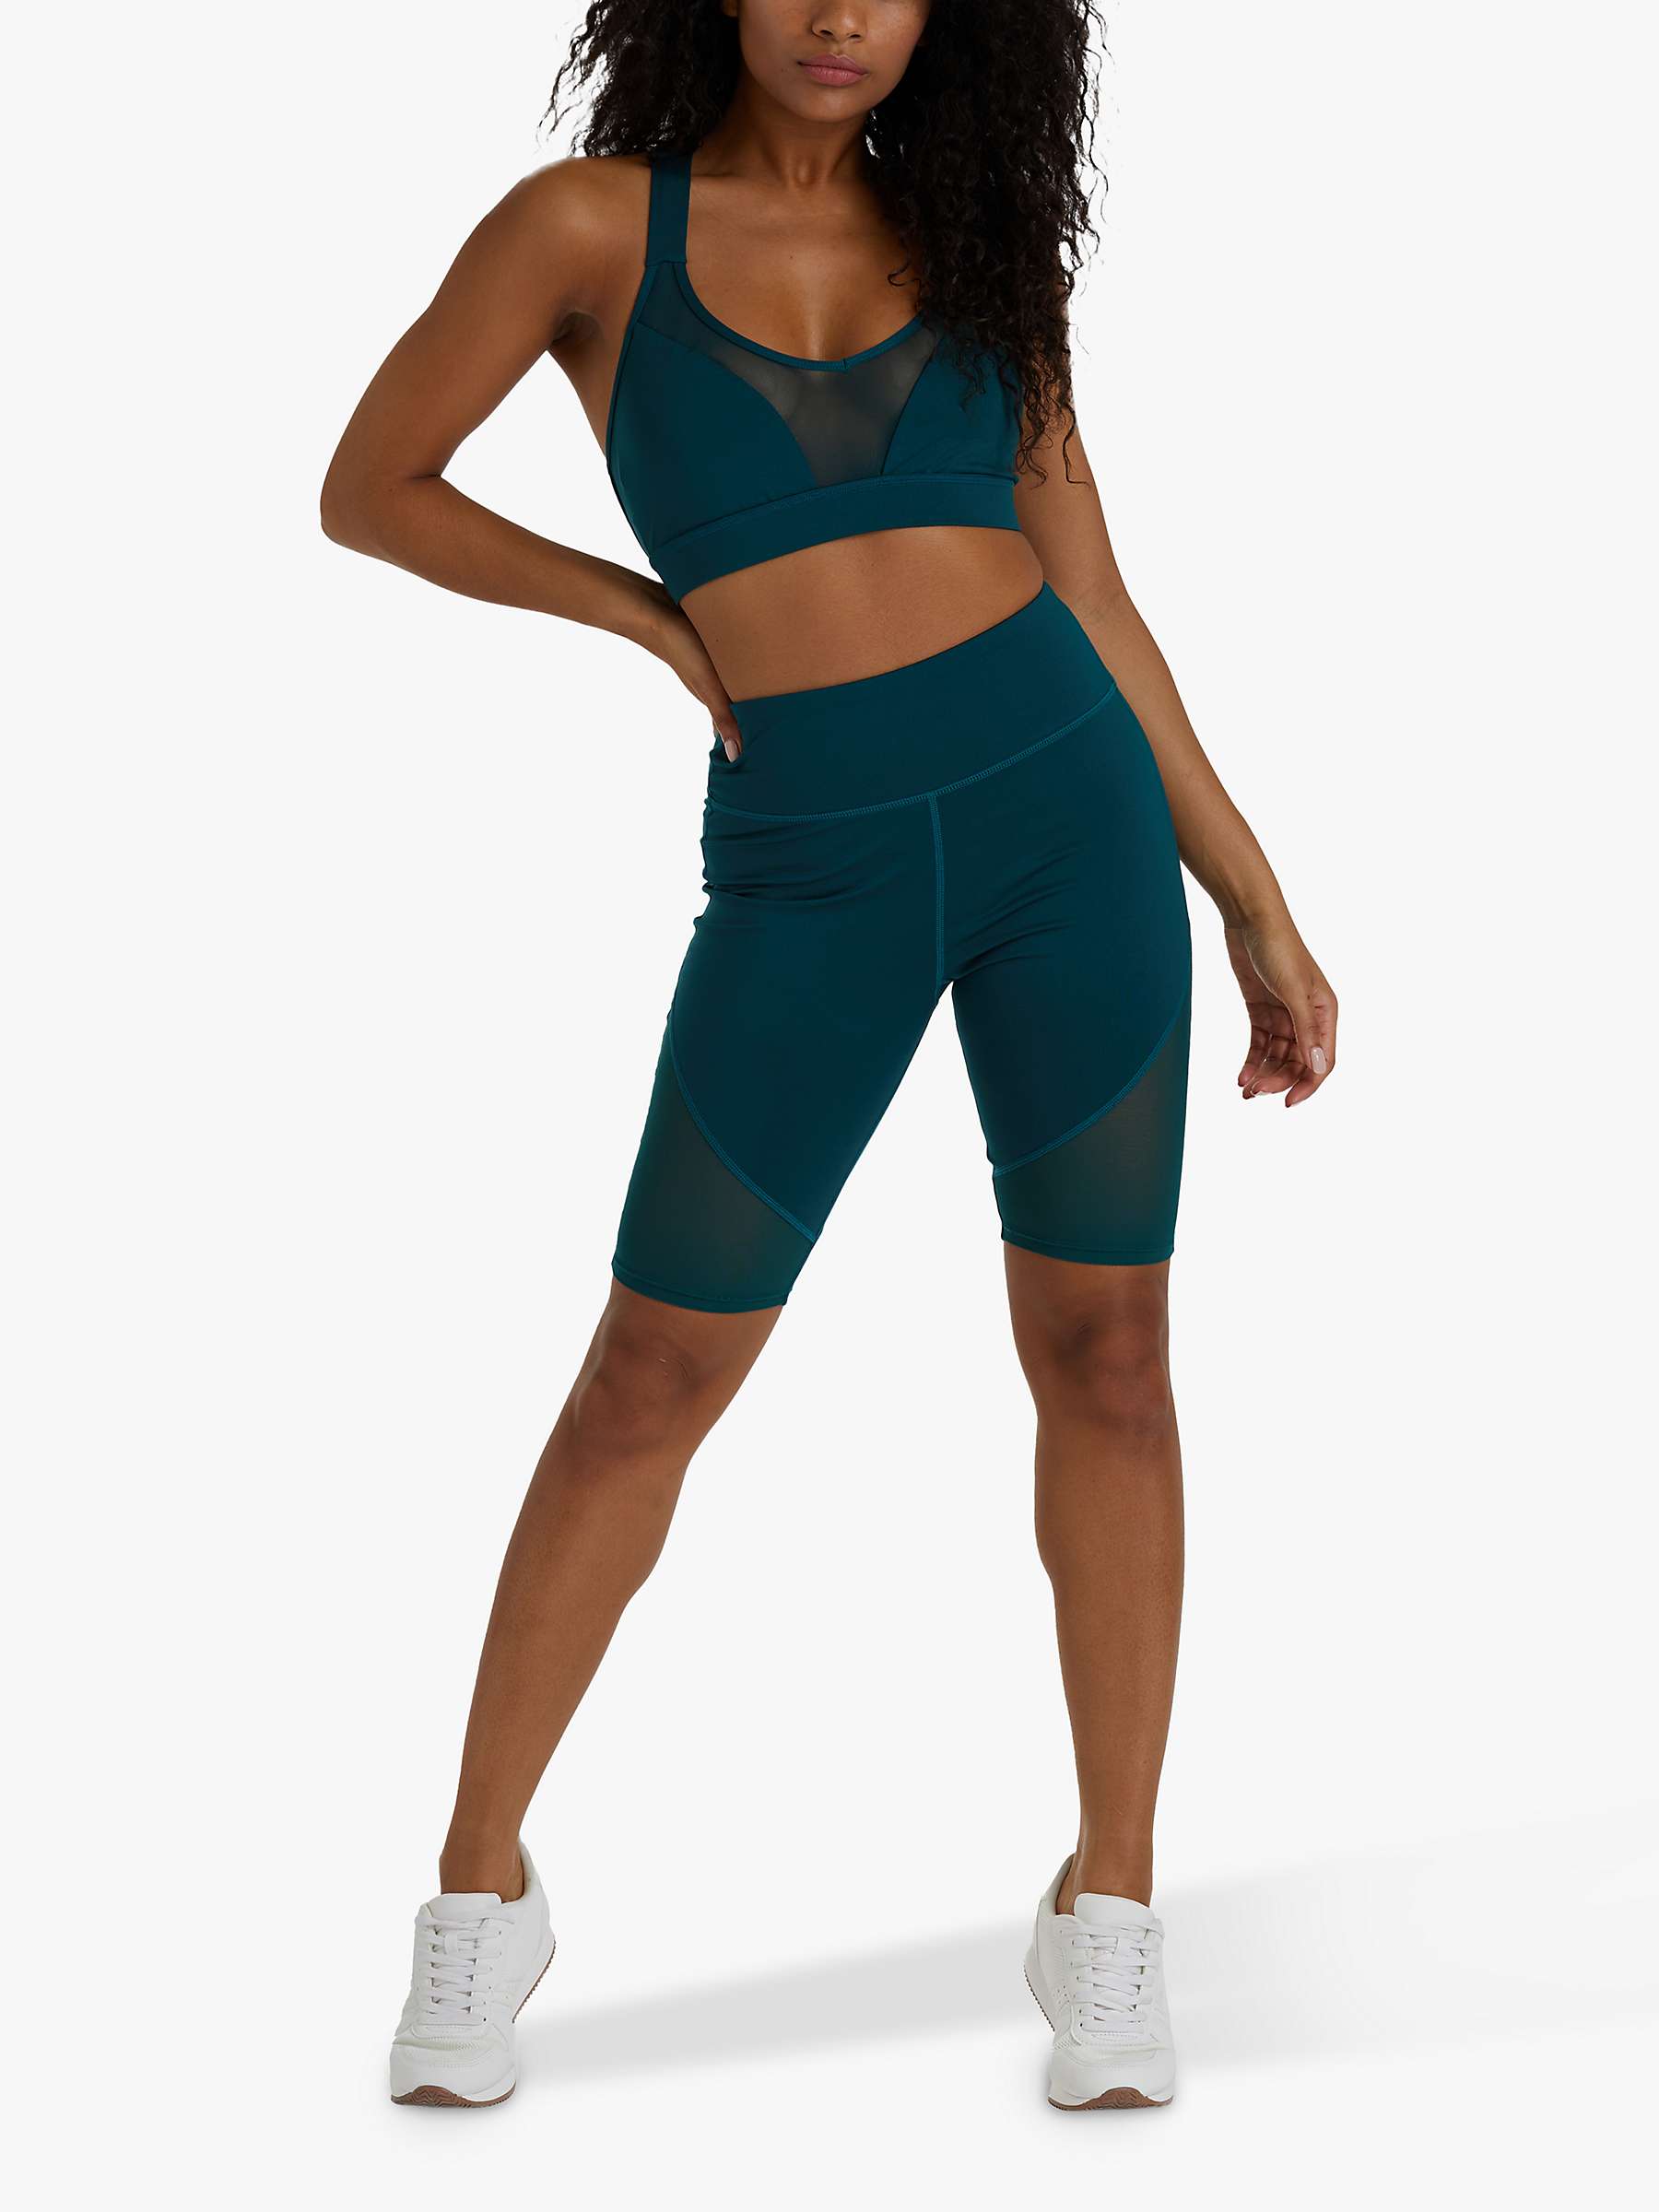 Buy Wolf & Whistle Mix and Match Mesh Panel Shorts, Teal Online at johnlewis.com